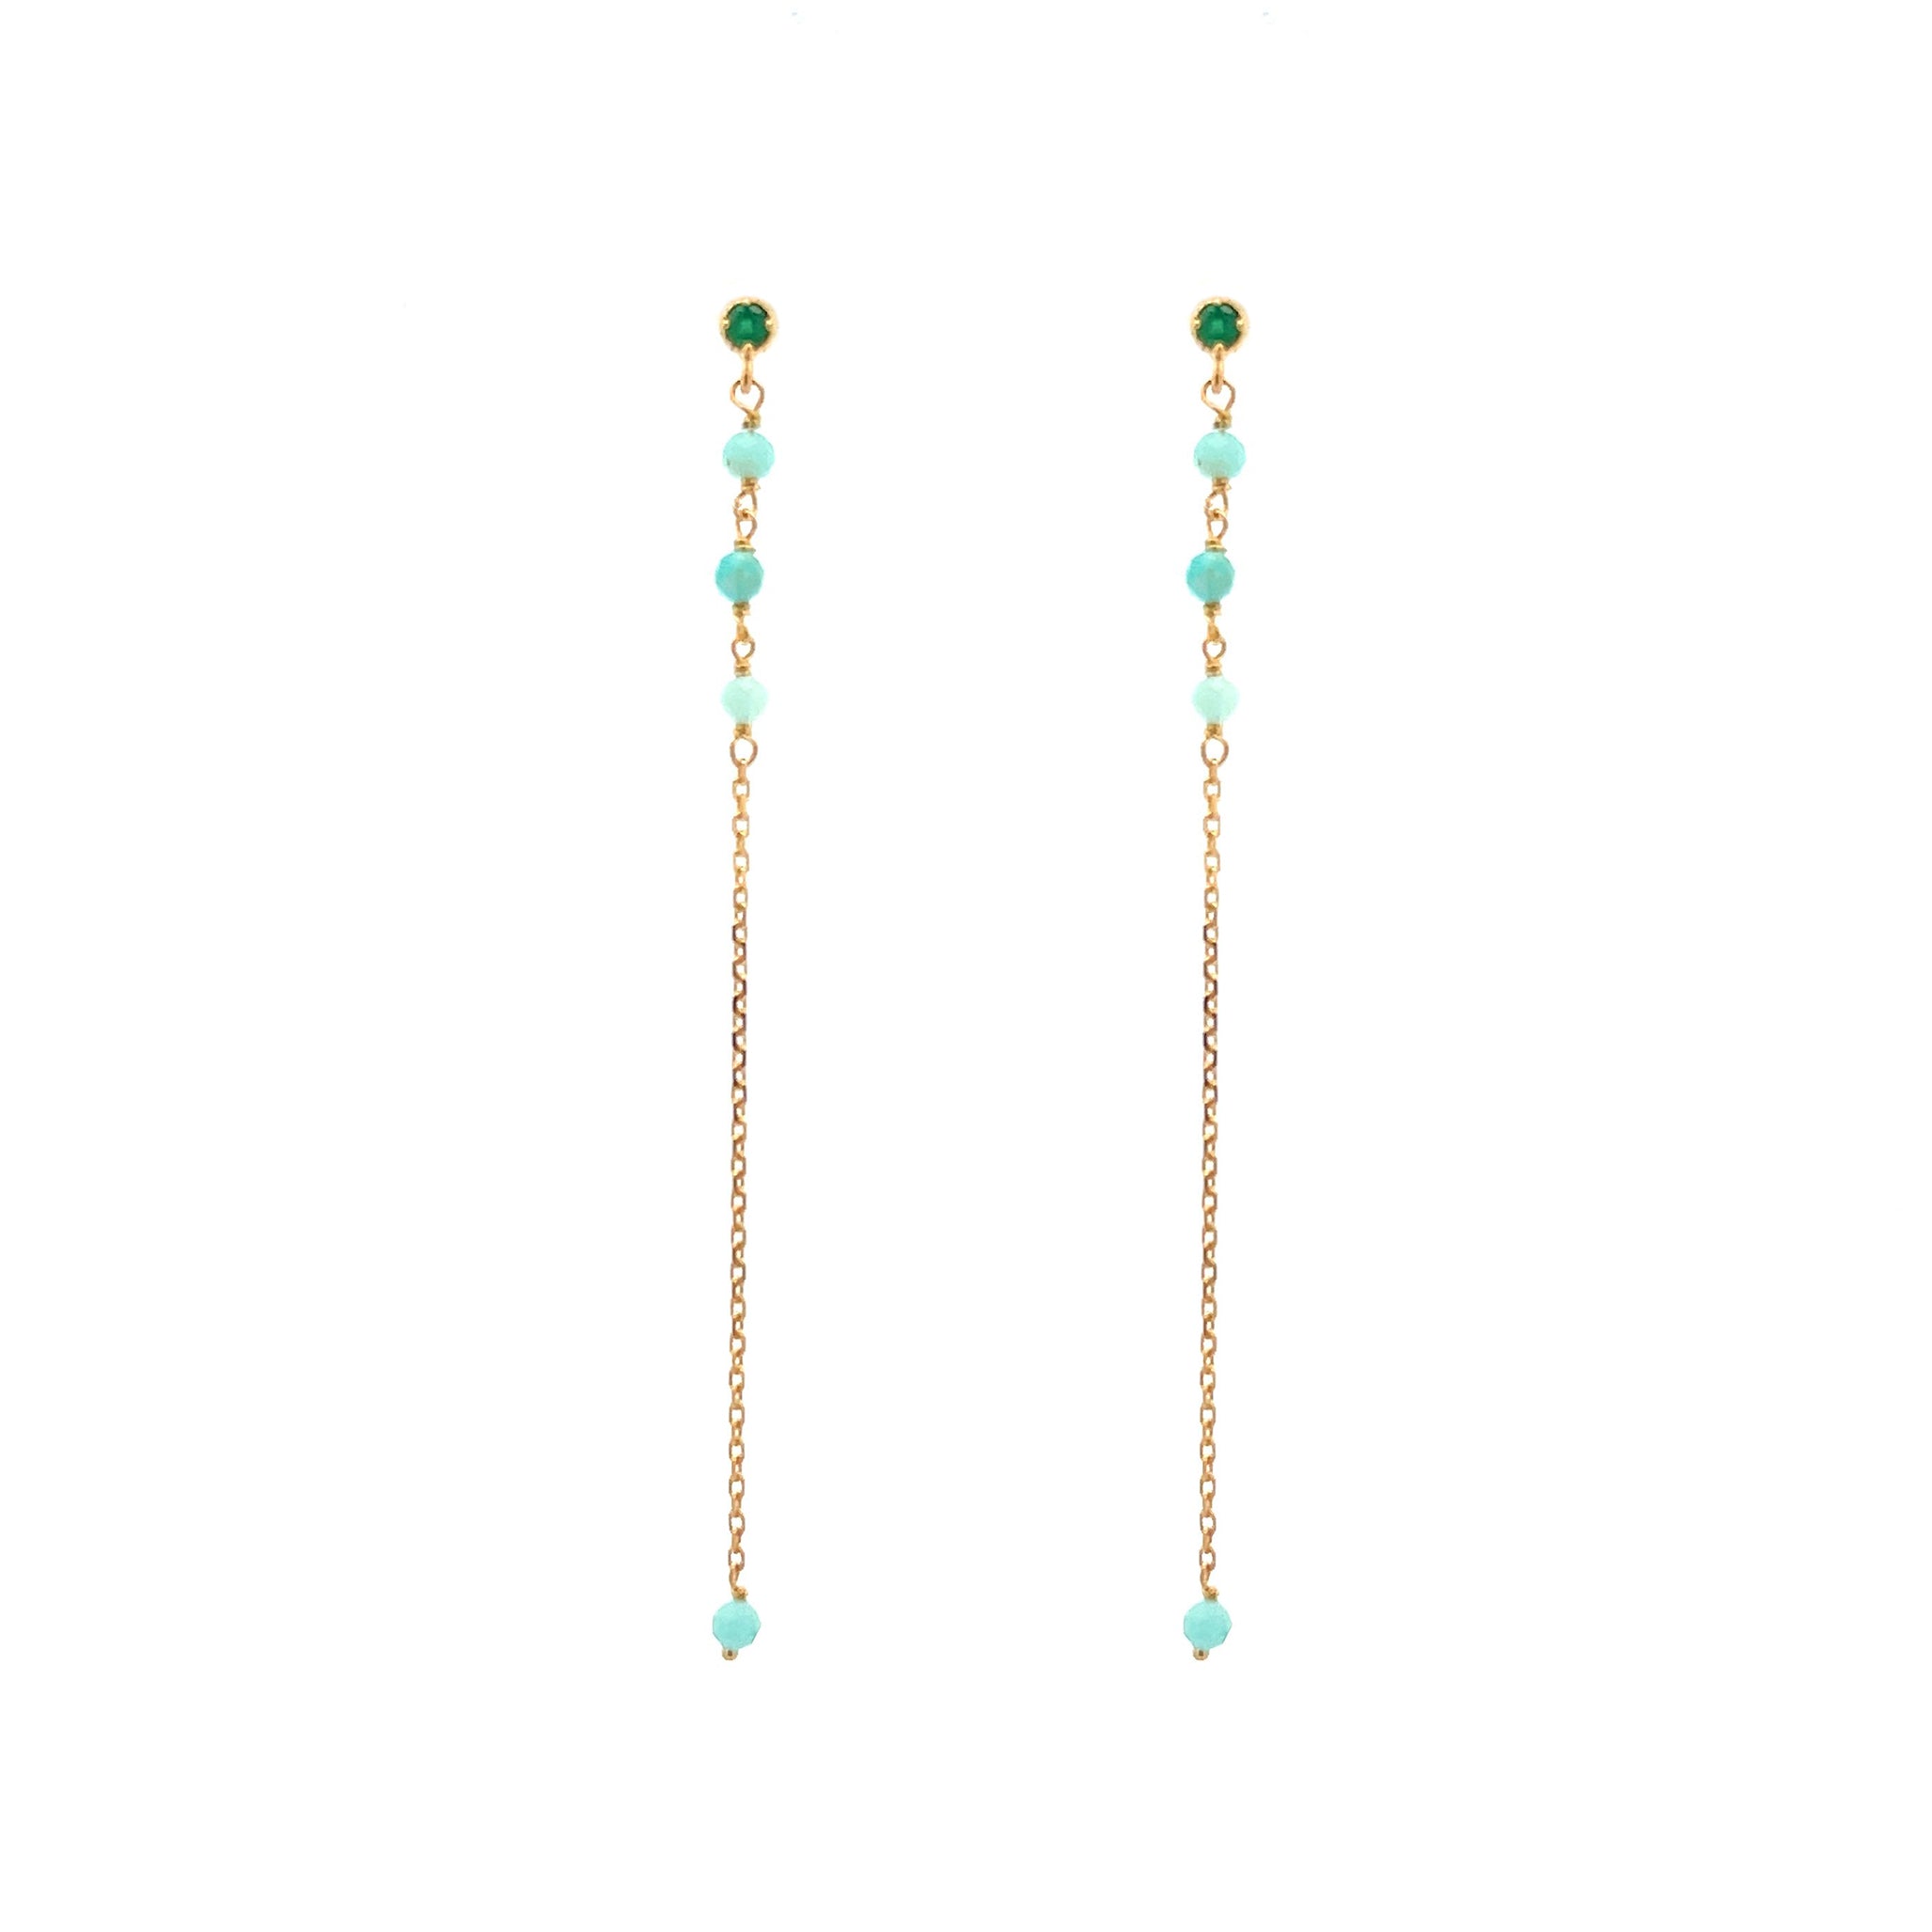 Discover Forest Aquamarine Drop Earrings